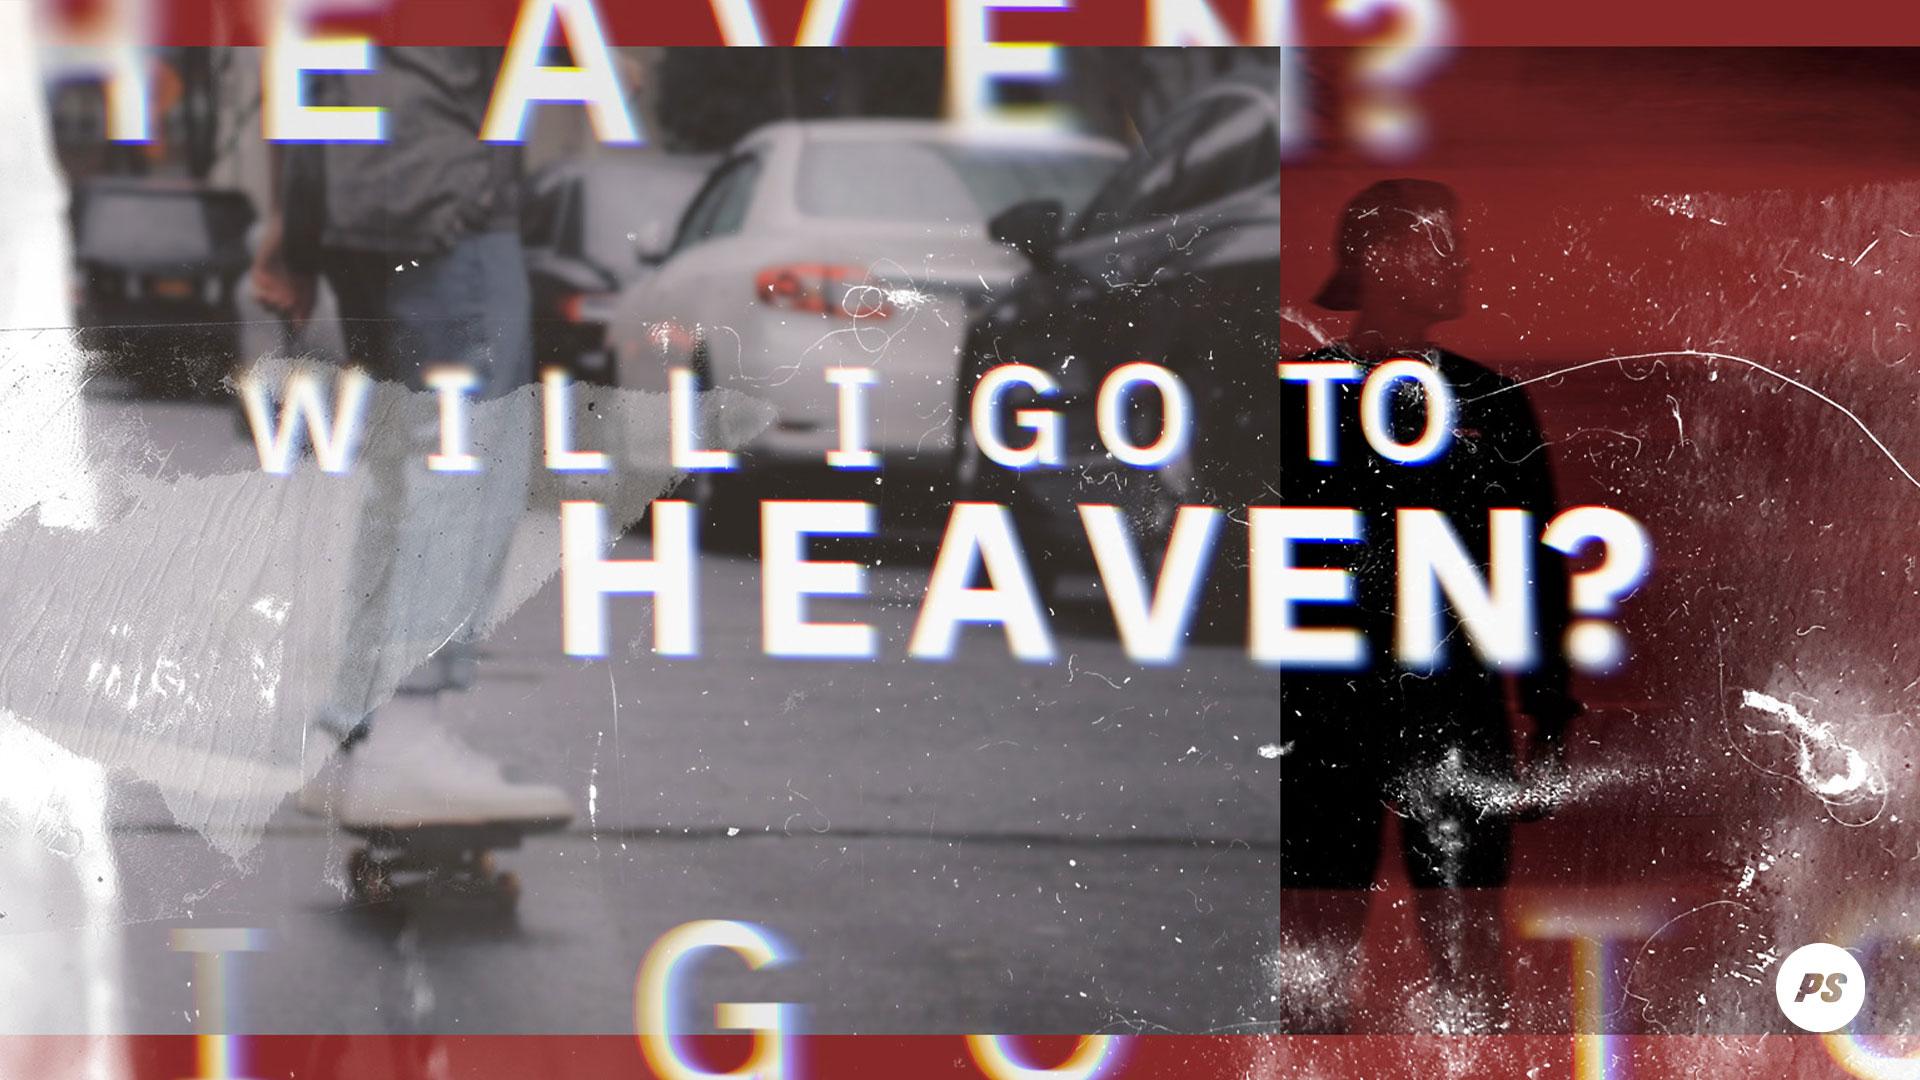 Featured image for “Will I Go To Heaven?”